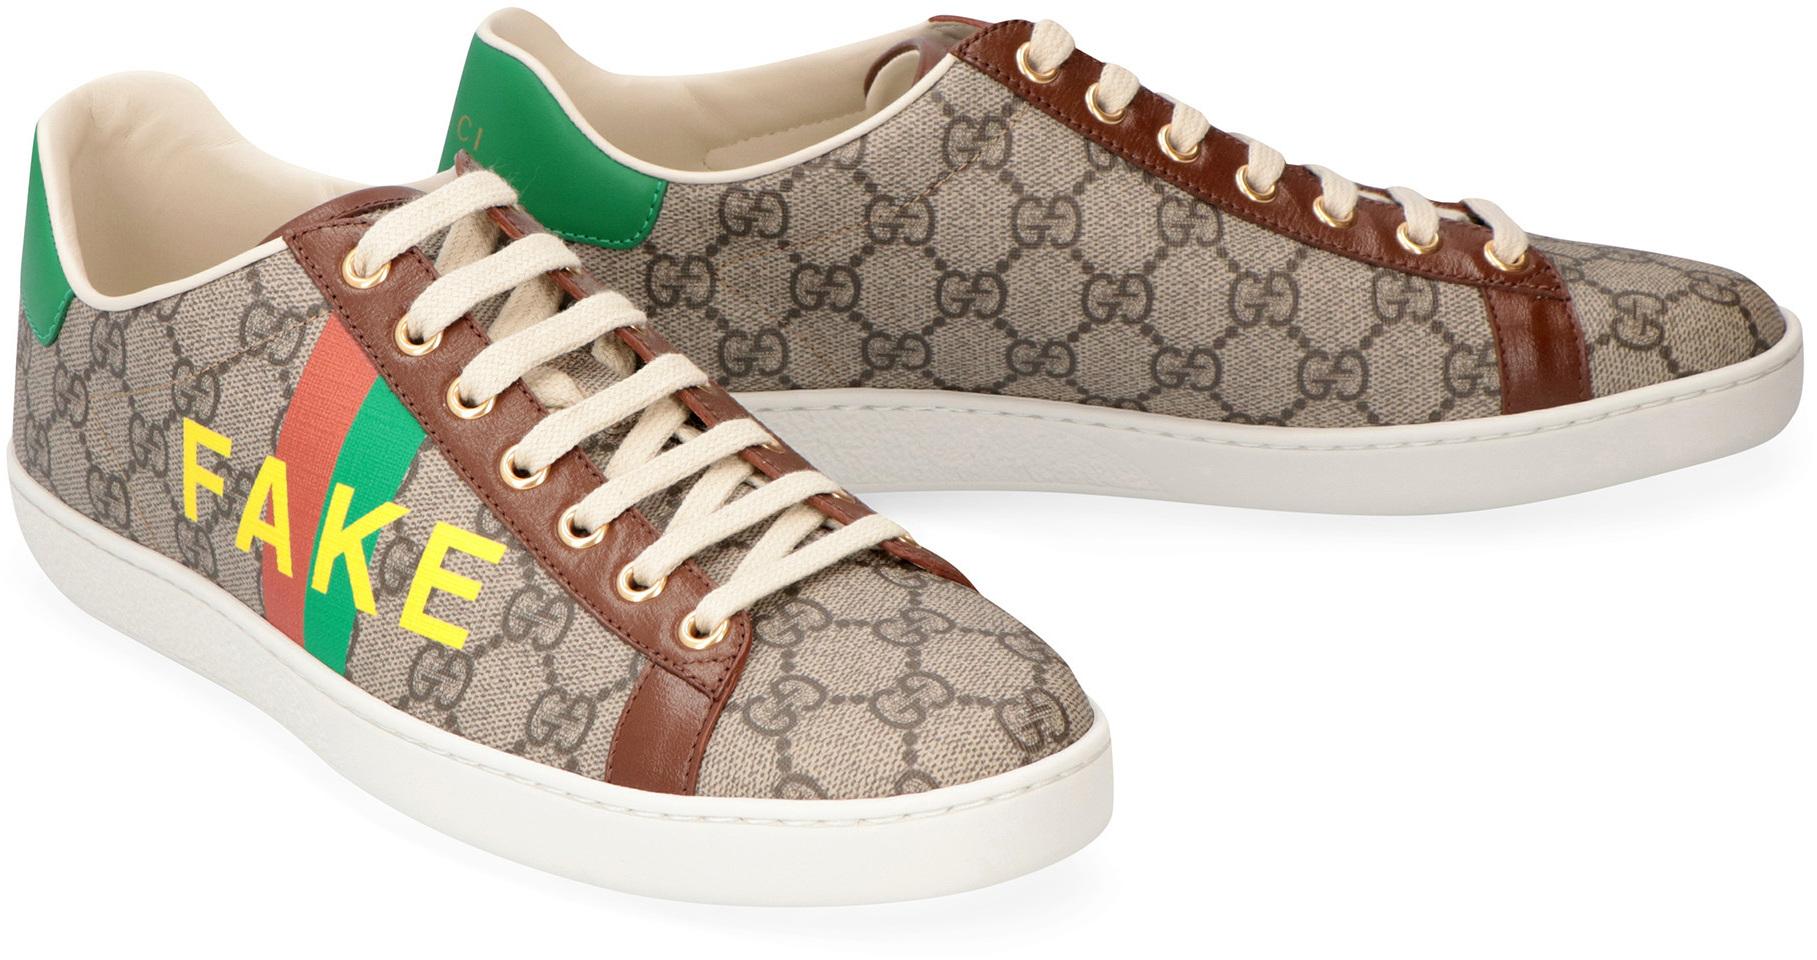 gucci shoes not fake - OFF-66% >Free Delivery